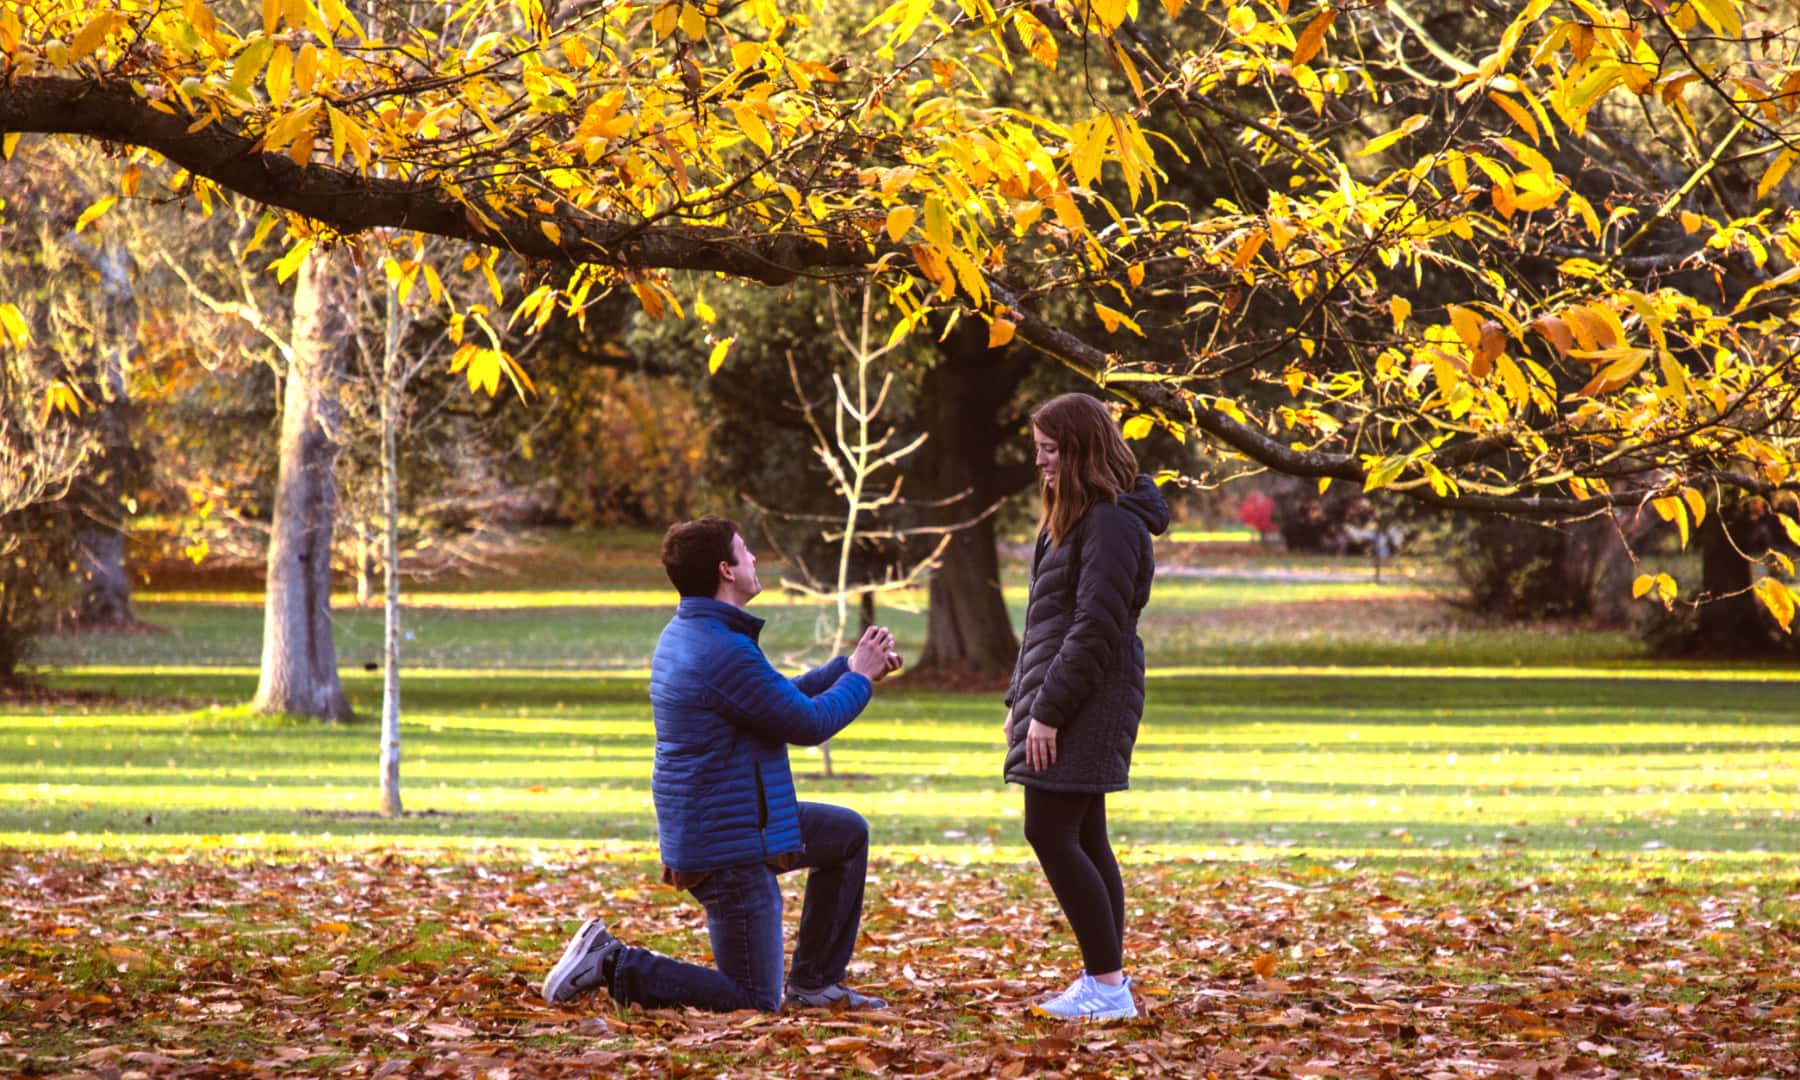 Tim on his knee proposing to McKenna in Kew Gardens under a tree with fall leaves.